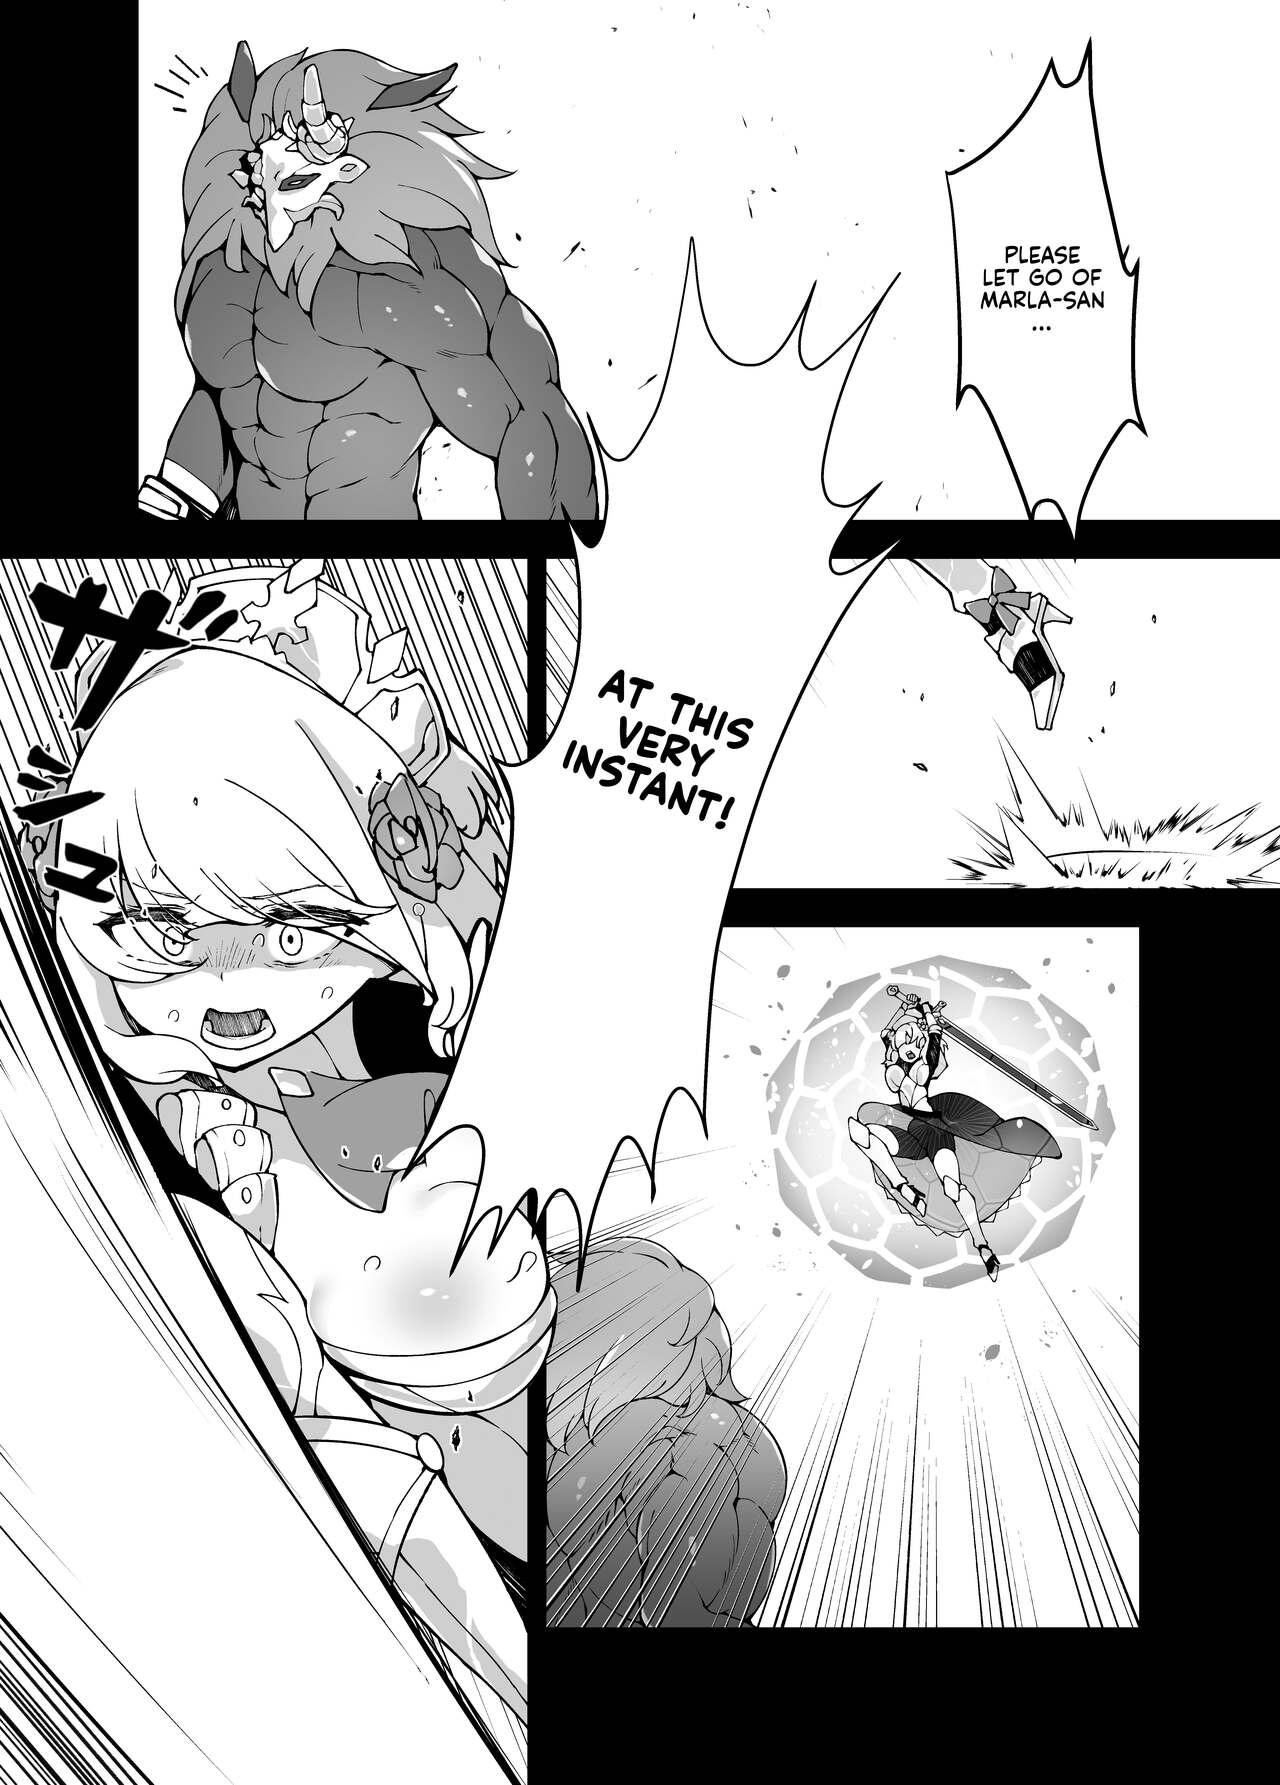 Futa [Karouke (Karou)] The Attack of the Hilichurls II ~The Invasion's Prelude~ Noelle,Chivalric Blossom that withered~ (Genshin Impact) [English] [Kyuume] [Digital] - Genshin impact Perfect Tits - Page 12